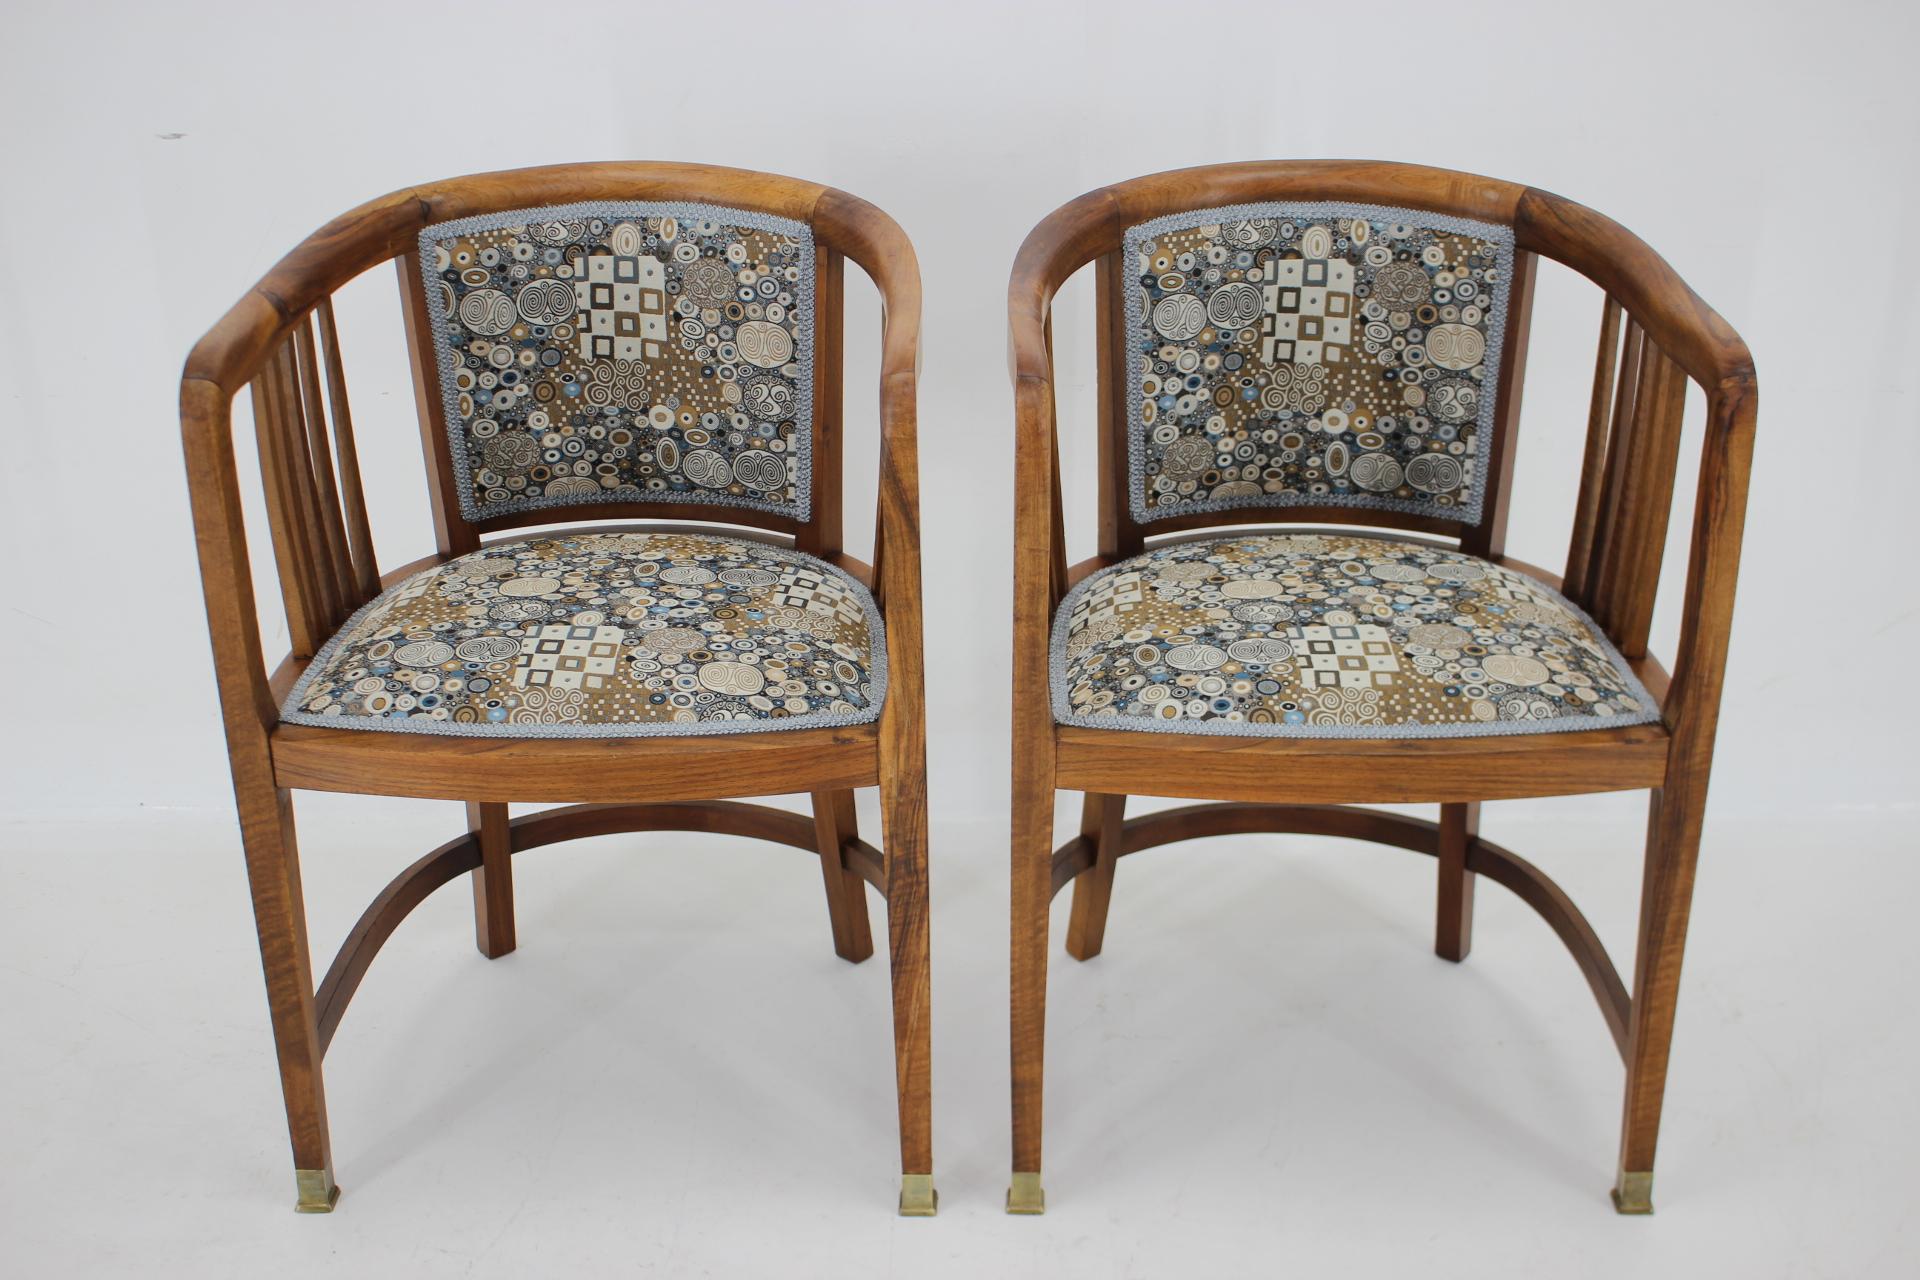 - carefully refurbished -
- Professionally reupholstered in quality fabric designed by Gustav Klimt 
- height of seat 45 cm.